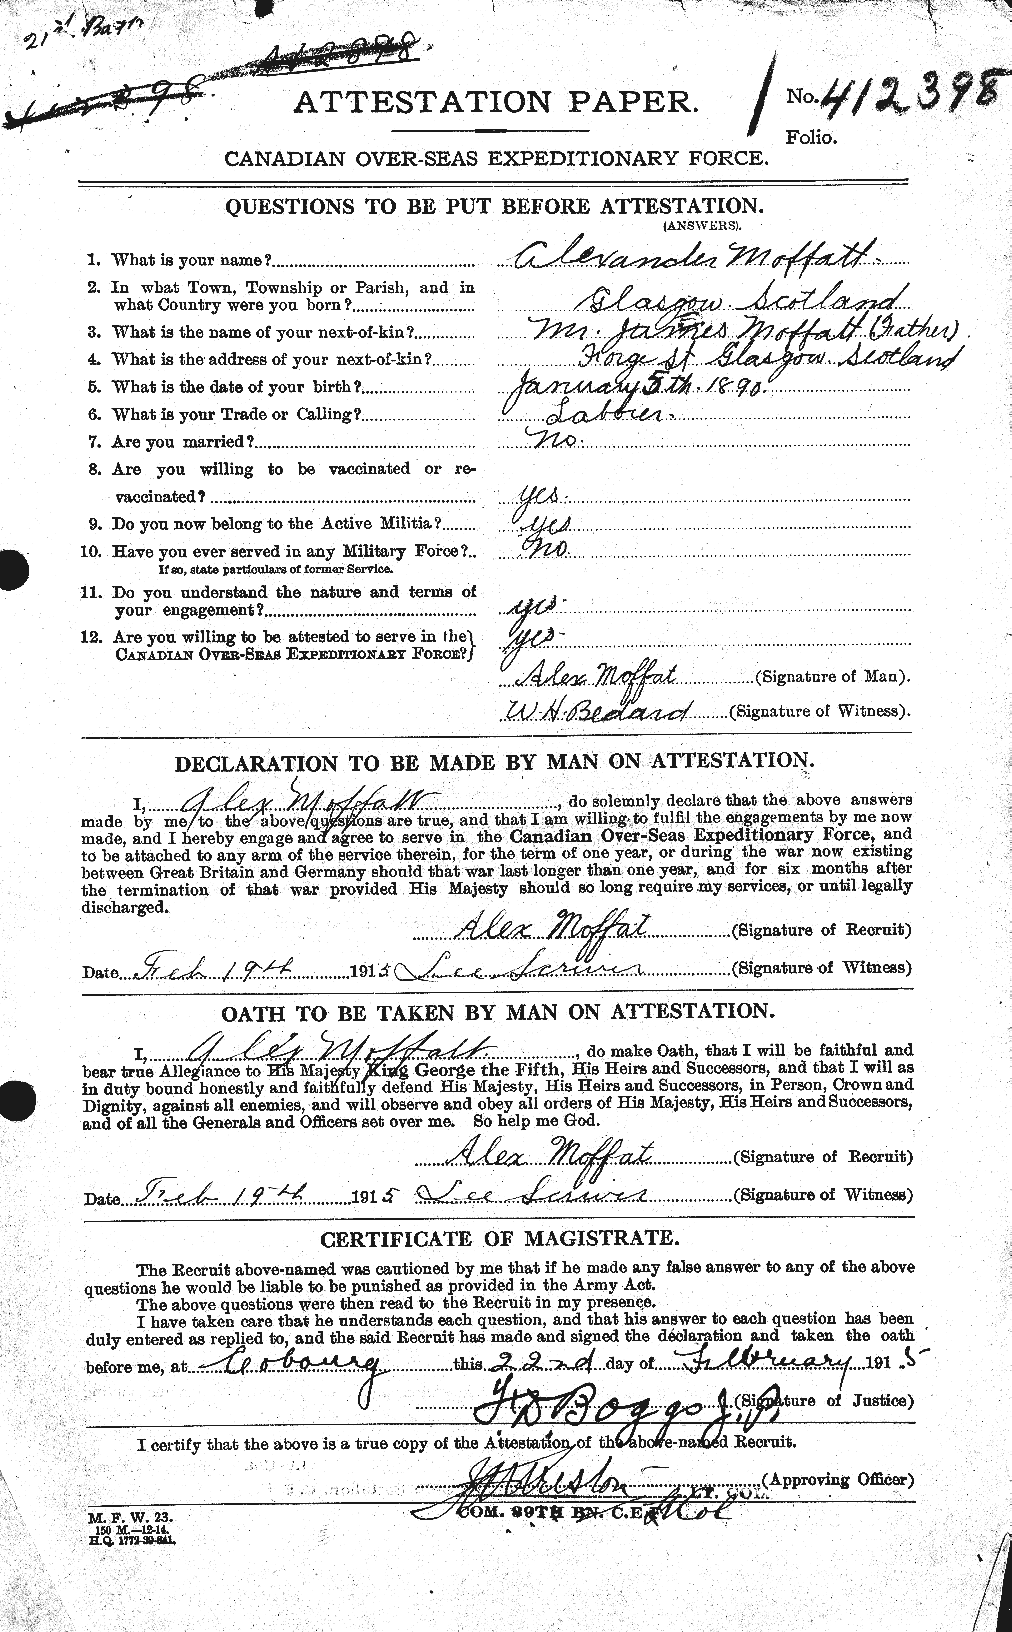 Personnel Records of the First World War - CEF 499100a